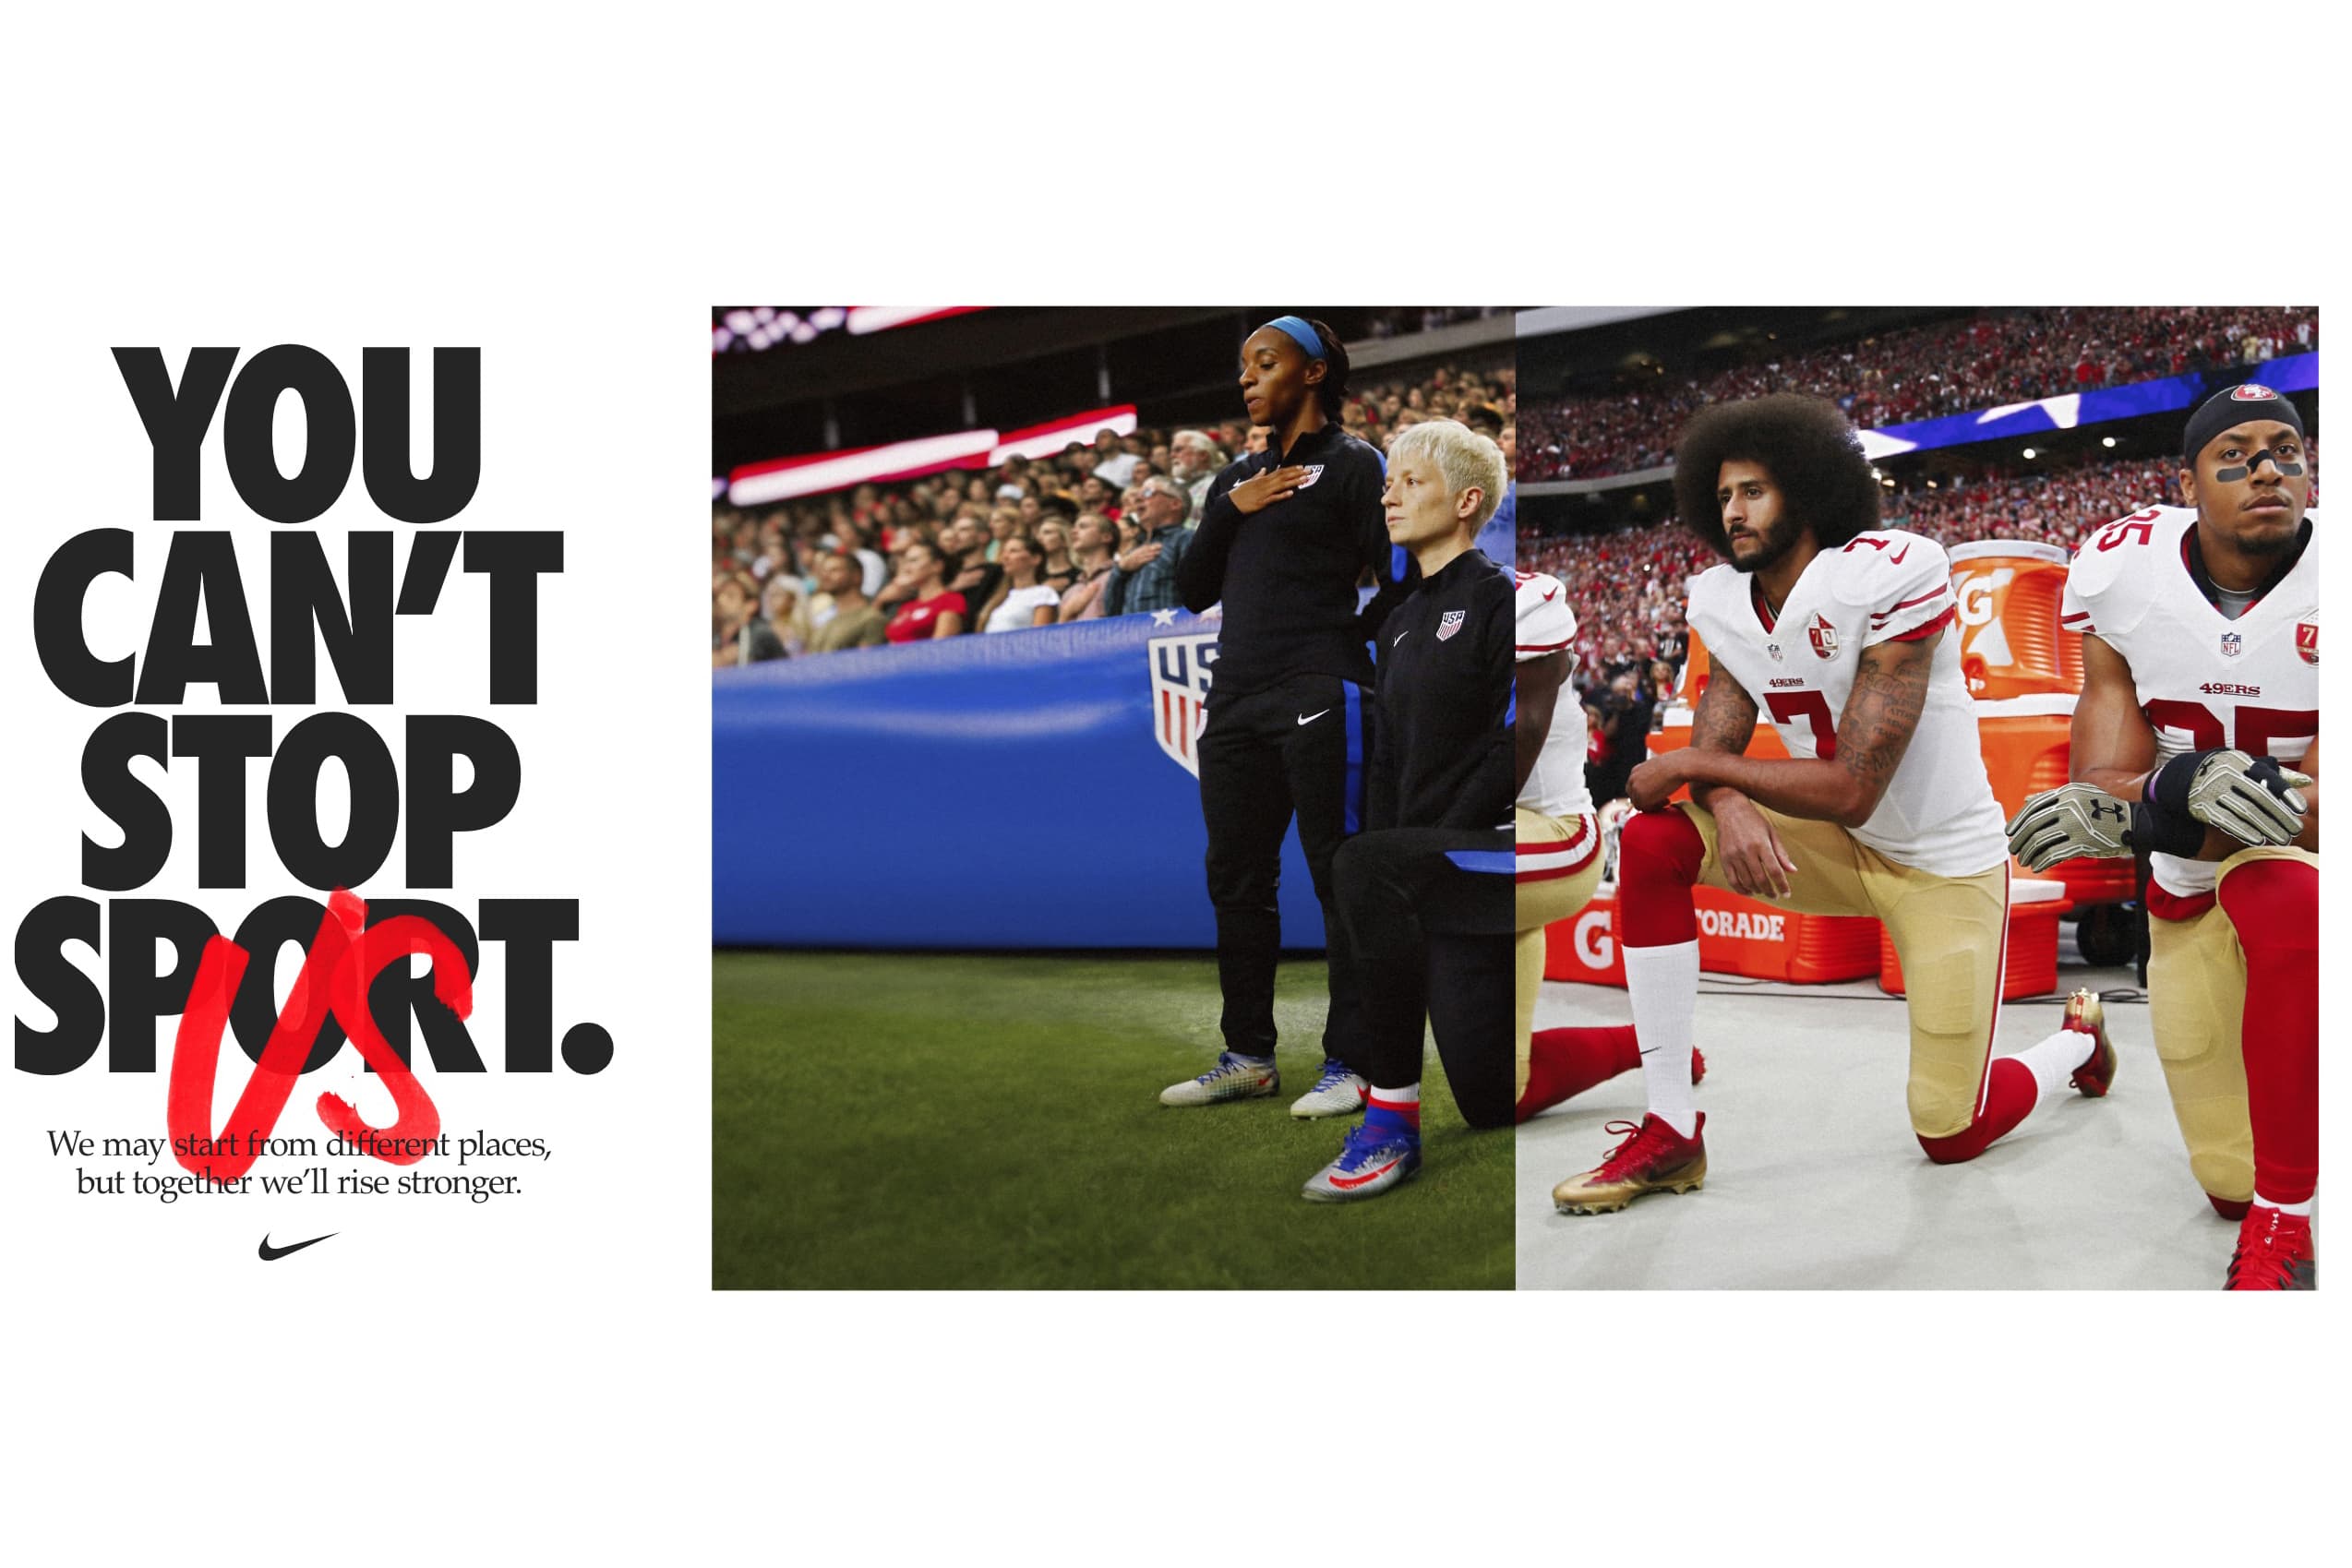 Megan Rapinoe speaks out about race and change, Nike campaign